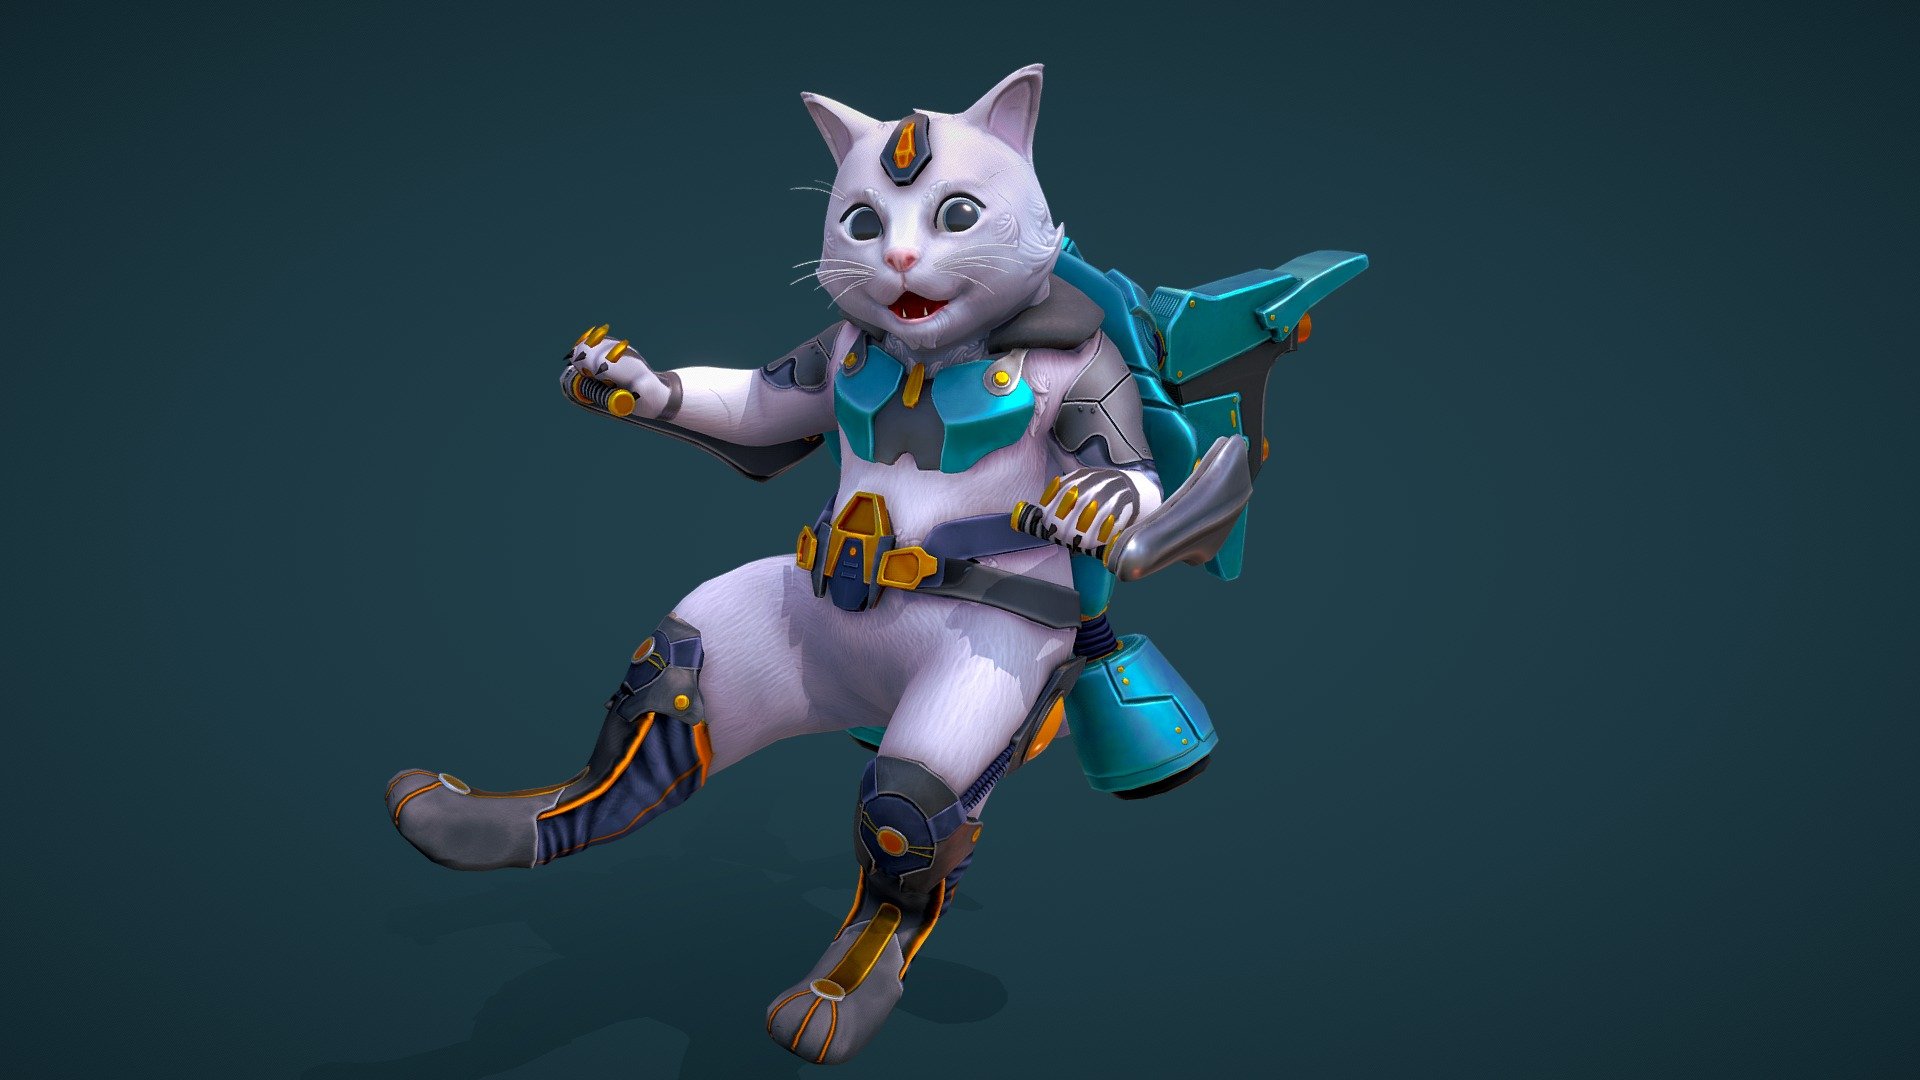 An overwatch style character I made for a competition!

Concept by Sunny Hong - https://www.artstation.com/artwork/lVZEDO

If you would like to see some UE4 renders, here it is on Artstation - https://www.artstation.com/artwork/0XwG9G - Jetpack Cat - 3D model by BeccyCollins 3d model